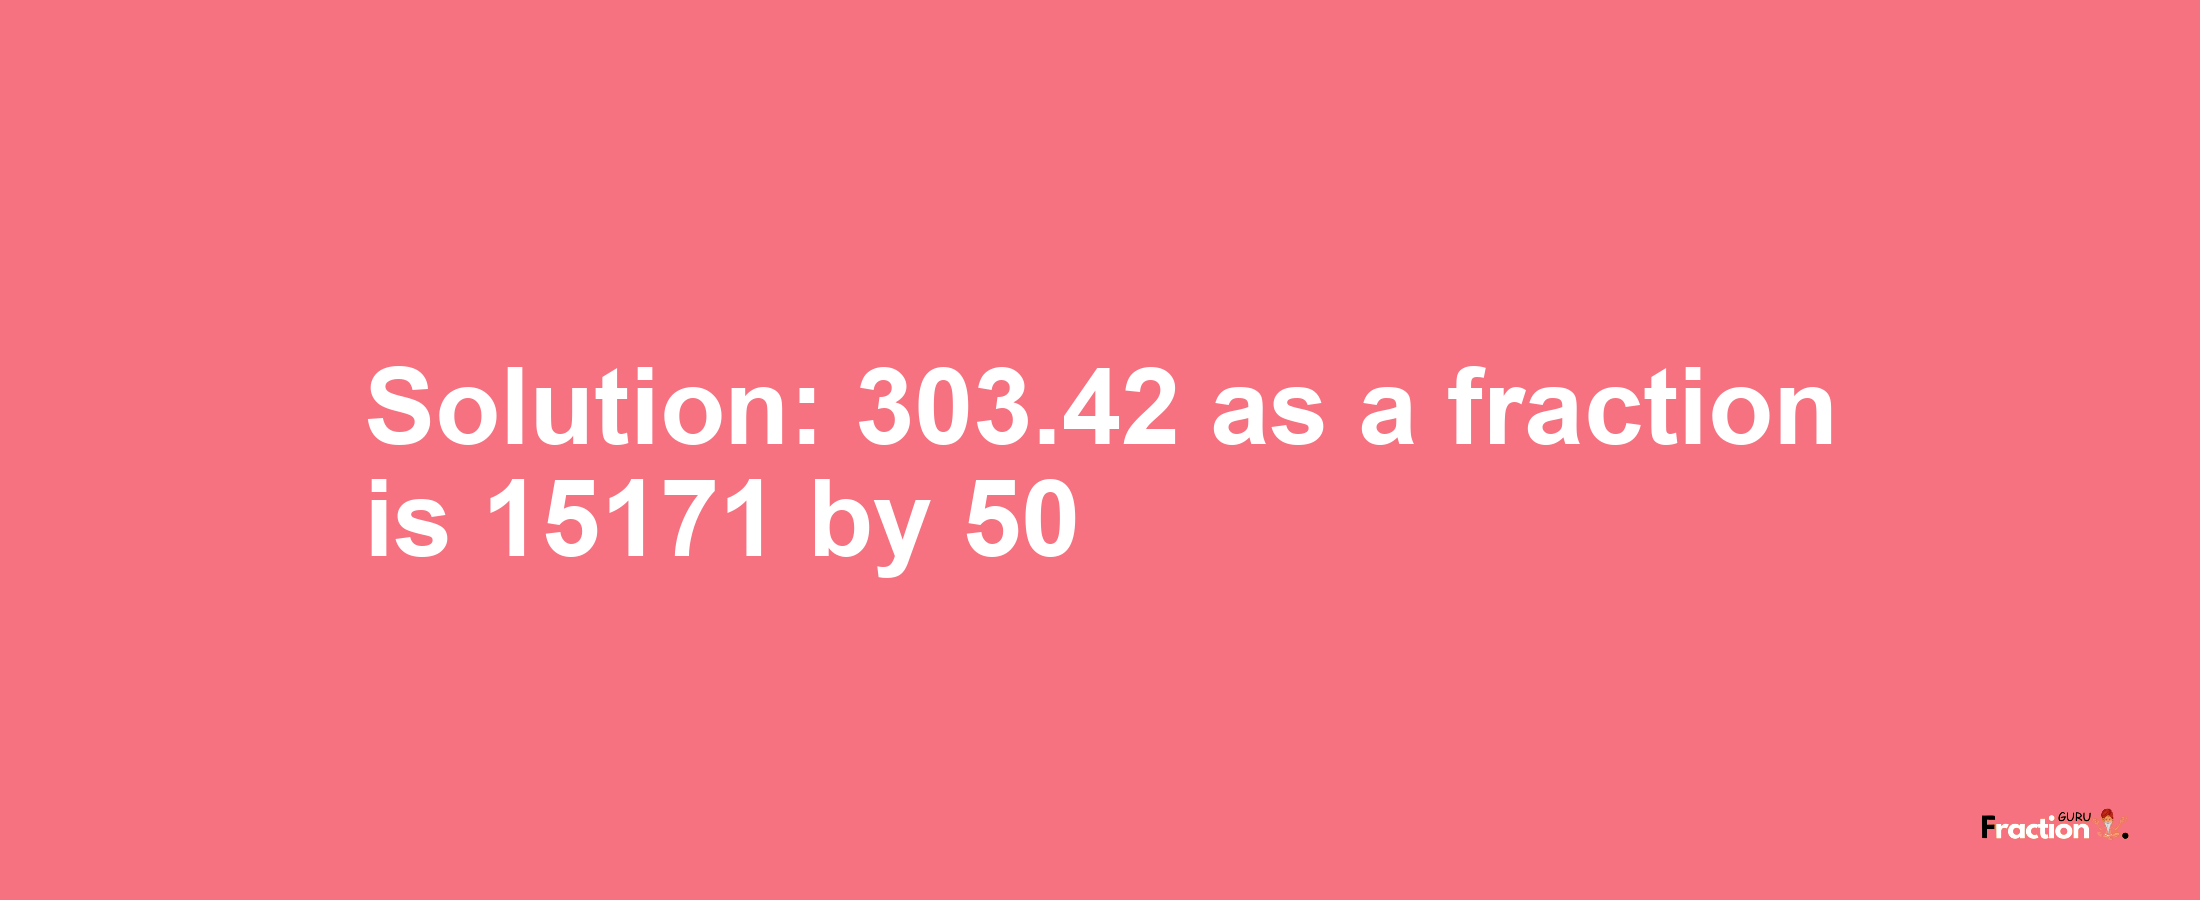 Solution:303.42 as a fraction is 15171/50